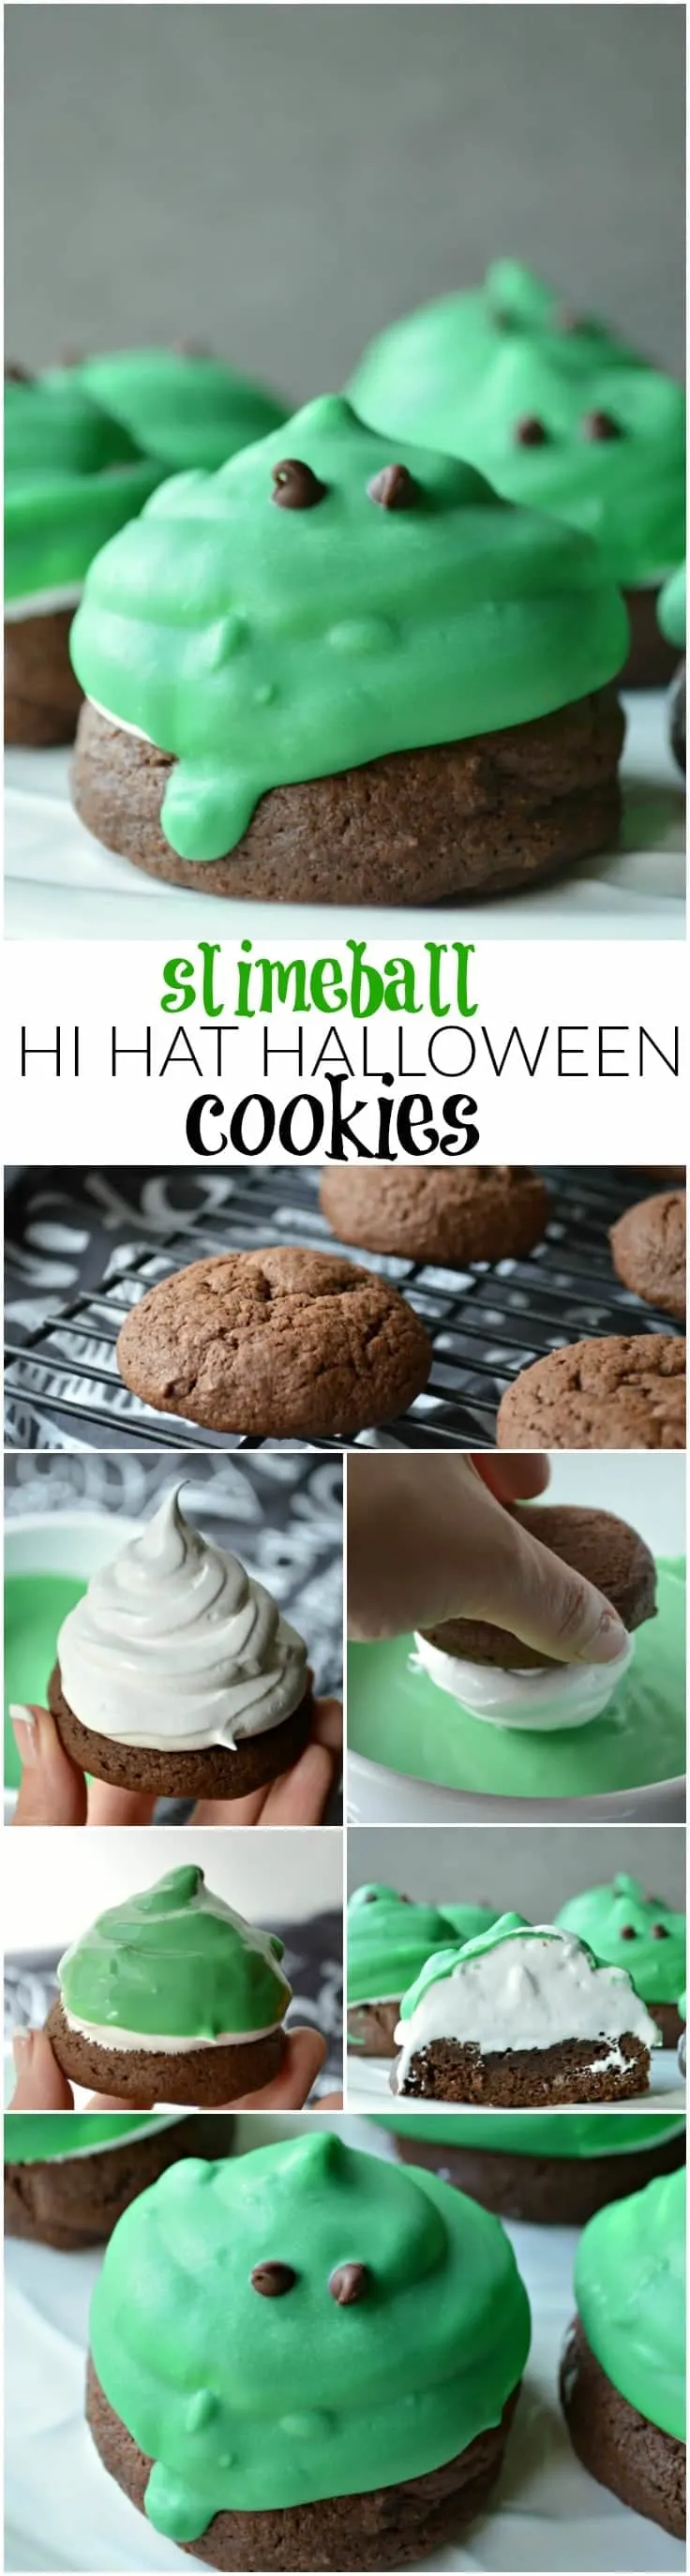 So much fun for Halloween! These Slimeball Hi Hat Halloween Cookies are topped with fluffy homemade marshmallow frosting and dipped in chocolate for a spooky sweet treat